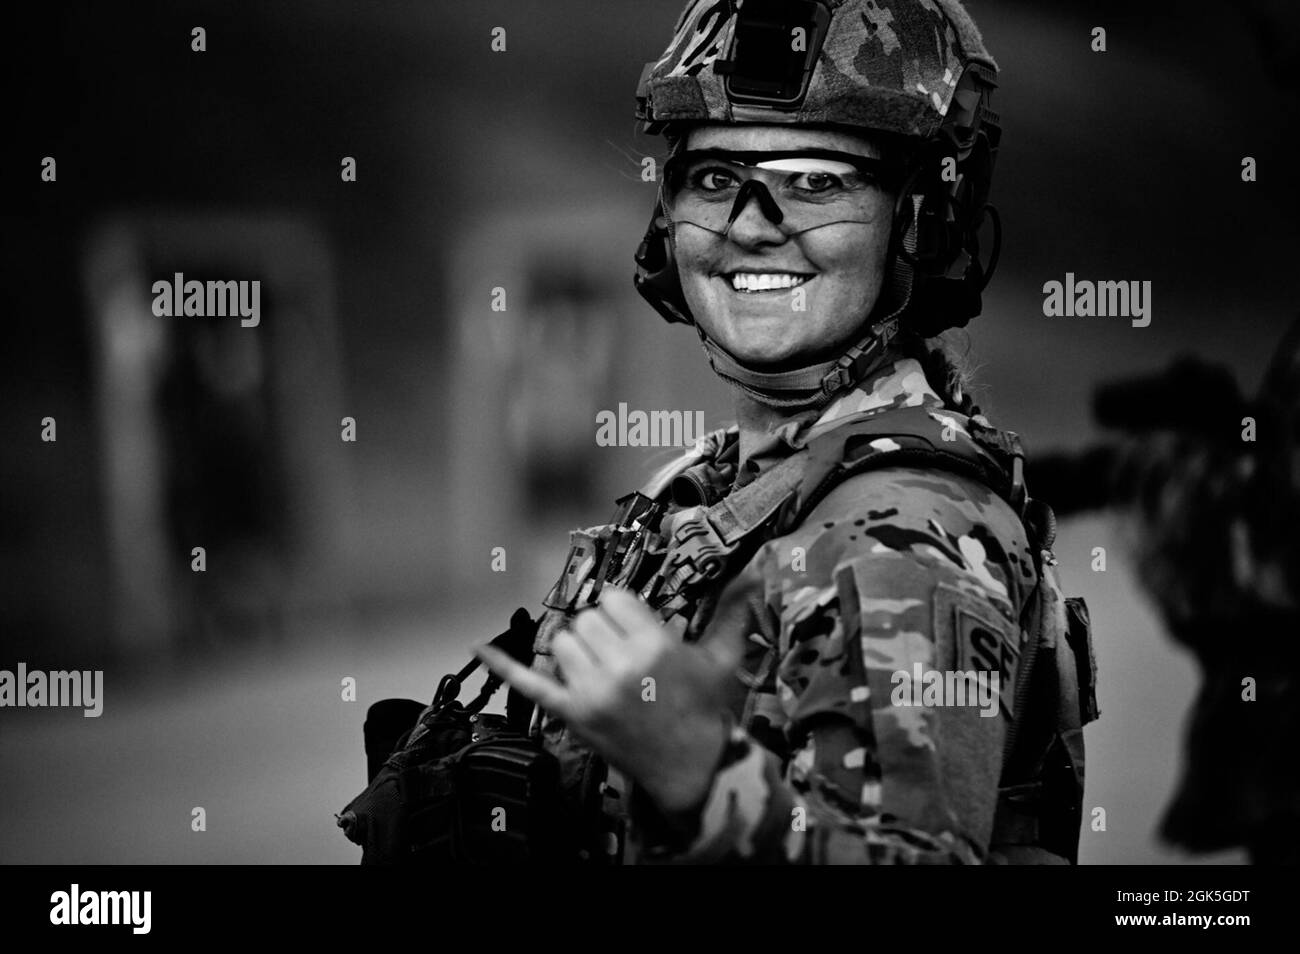 U.S. Air Force Tech. Sgt. Amanda Pruitt, a 126th Security Forces squad leader, smiles during training at Camp San Luis Obispo, California, August 7, 2021. Pruitt and her squadron spent the day firing weapons to meet qualifications for their career field. Stock Photo